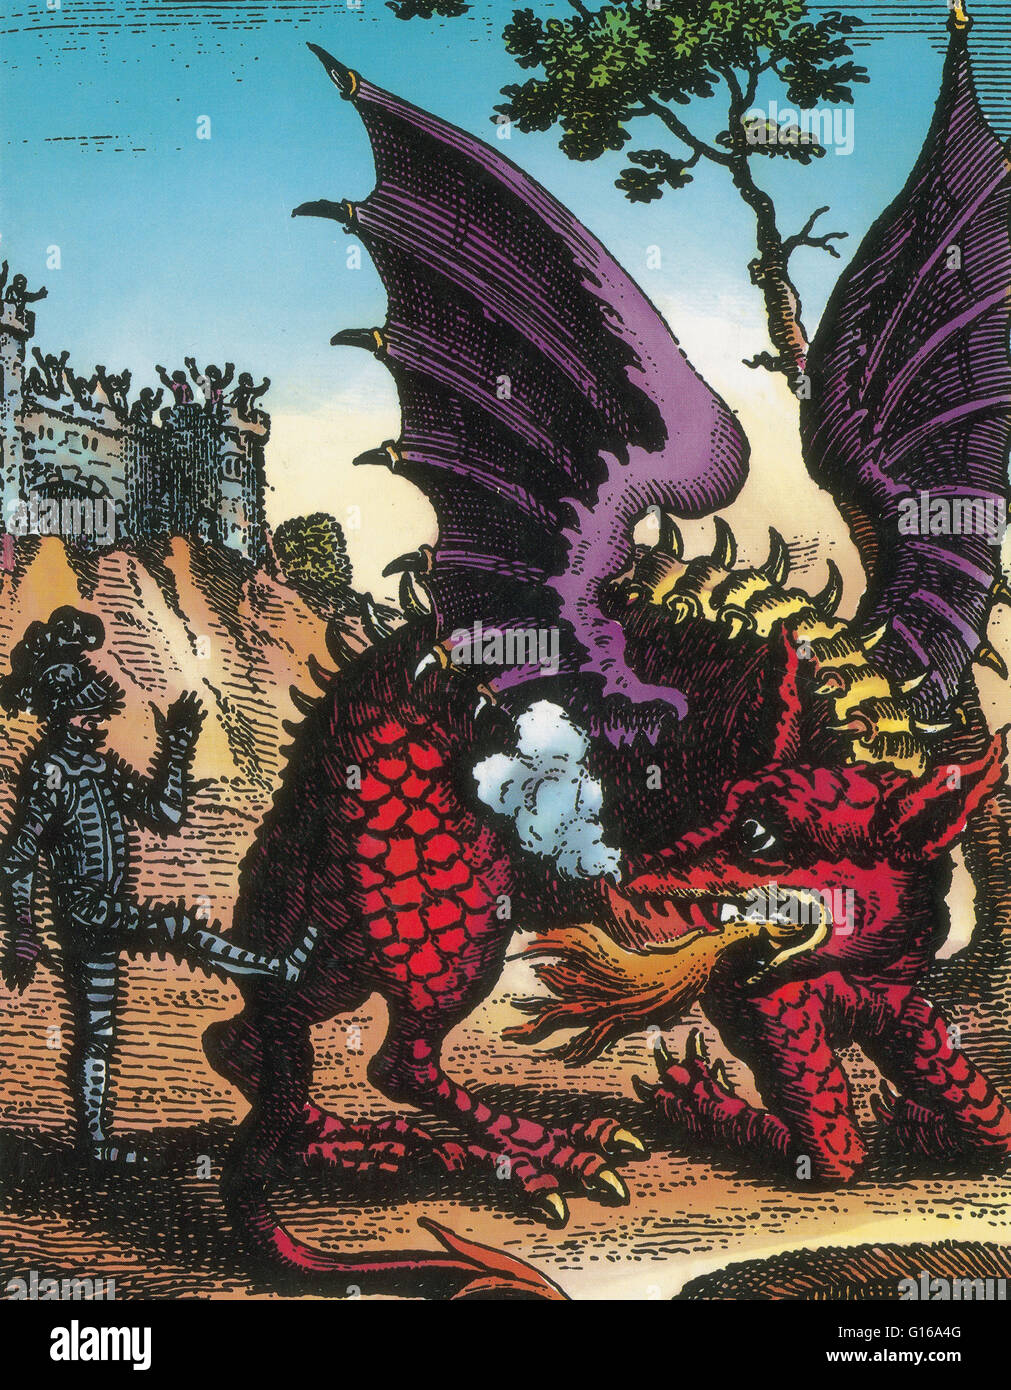 The Dragon of Wantley is England's most famous dragon legend. Back in the time of Queen Elizabeth I, the Yorkshire village of Wantley was attacked by a fearsome, fire breathing dragon. This monster terrorized the countryside until at last he was vanquishe Stock Photo